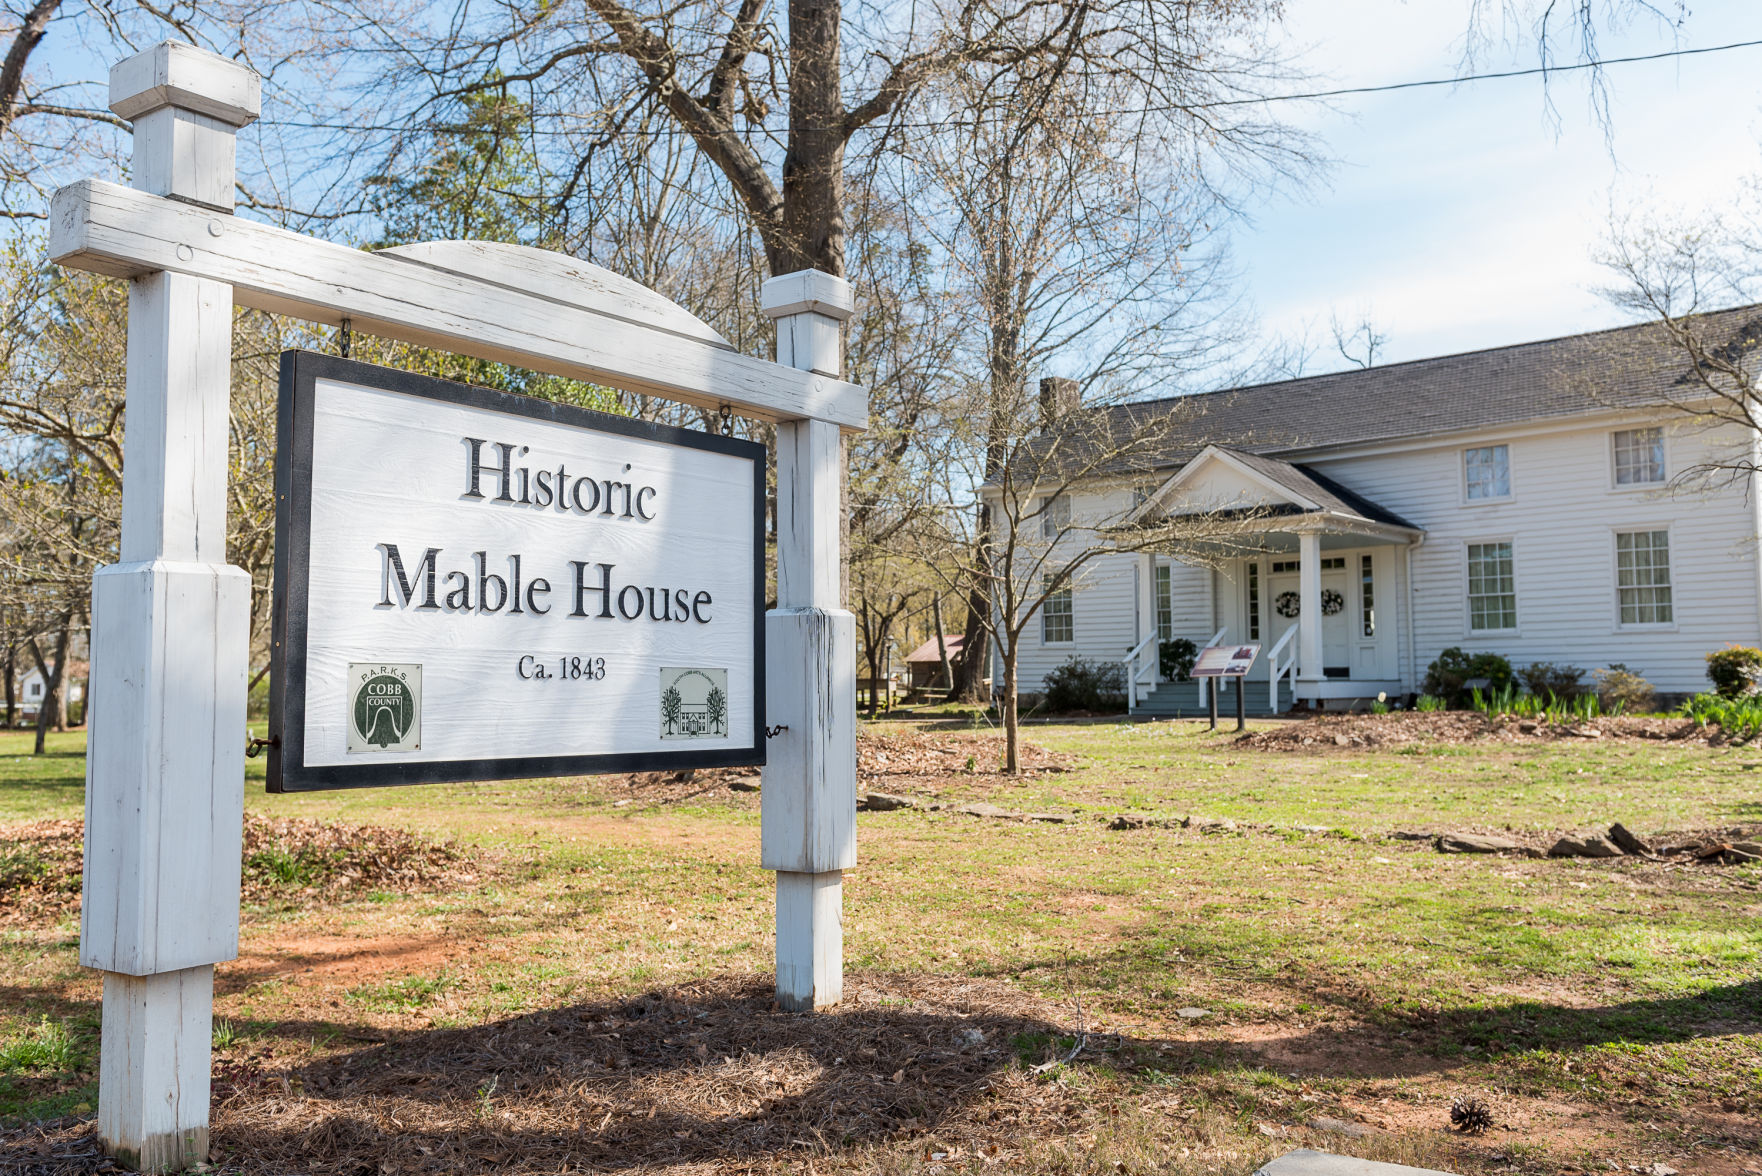 The Mable House Arts Center